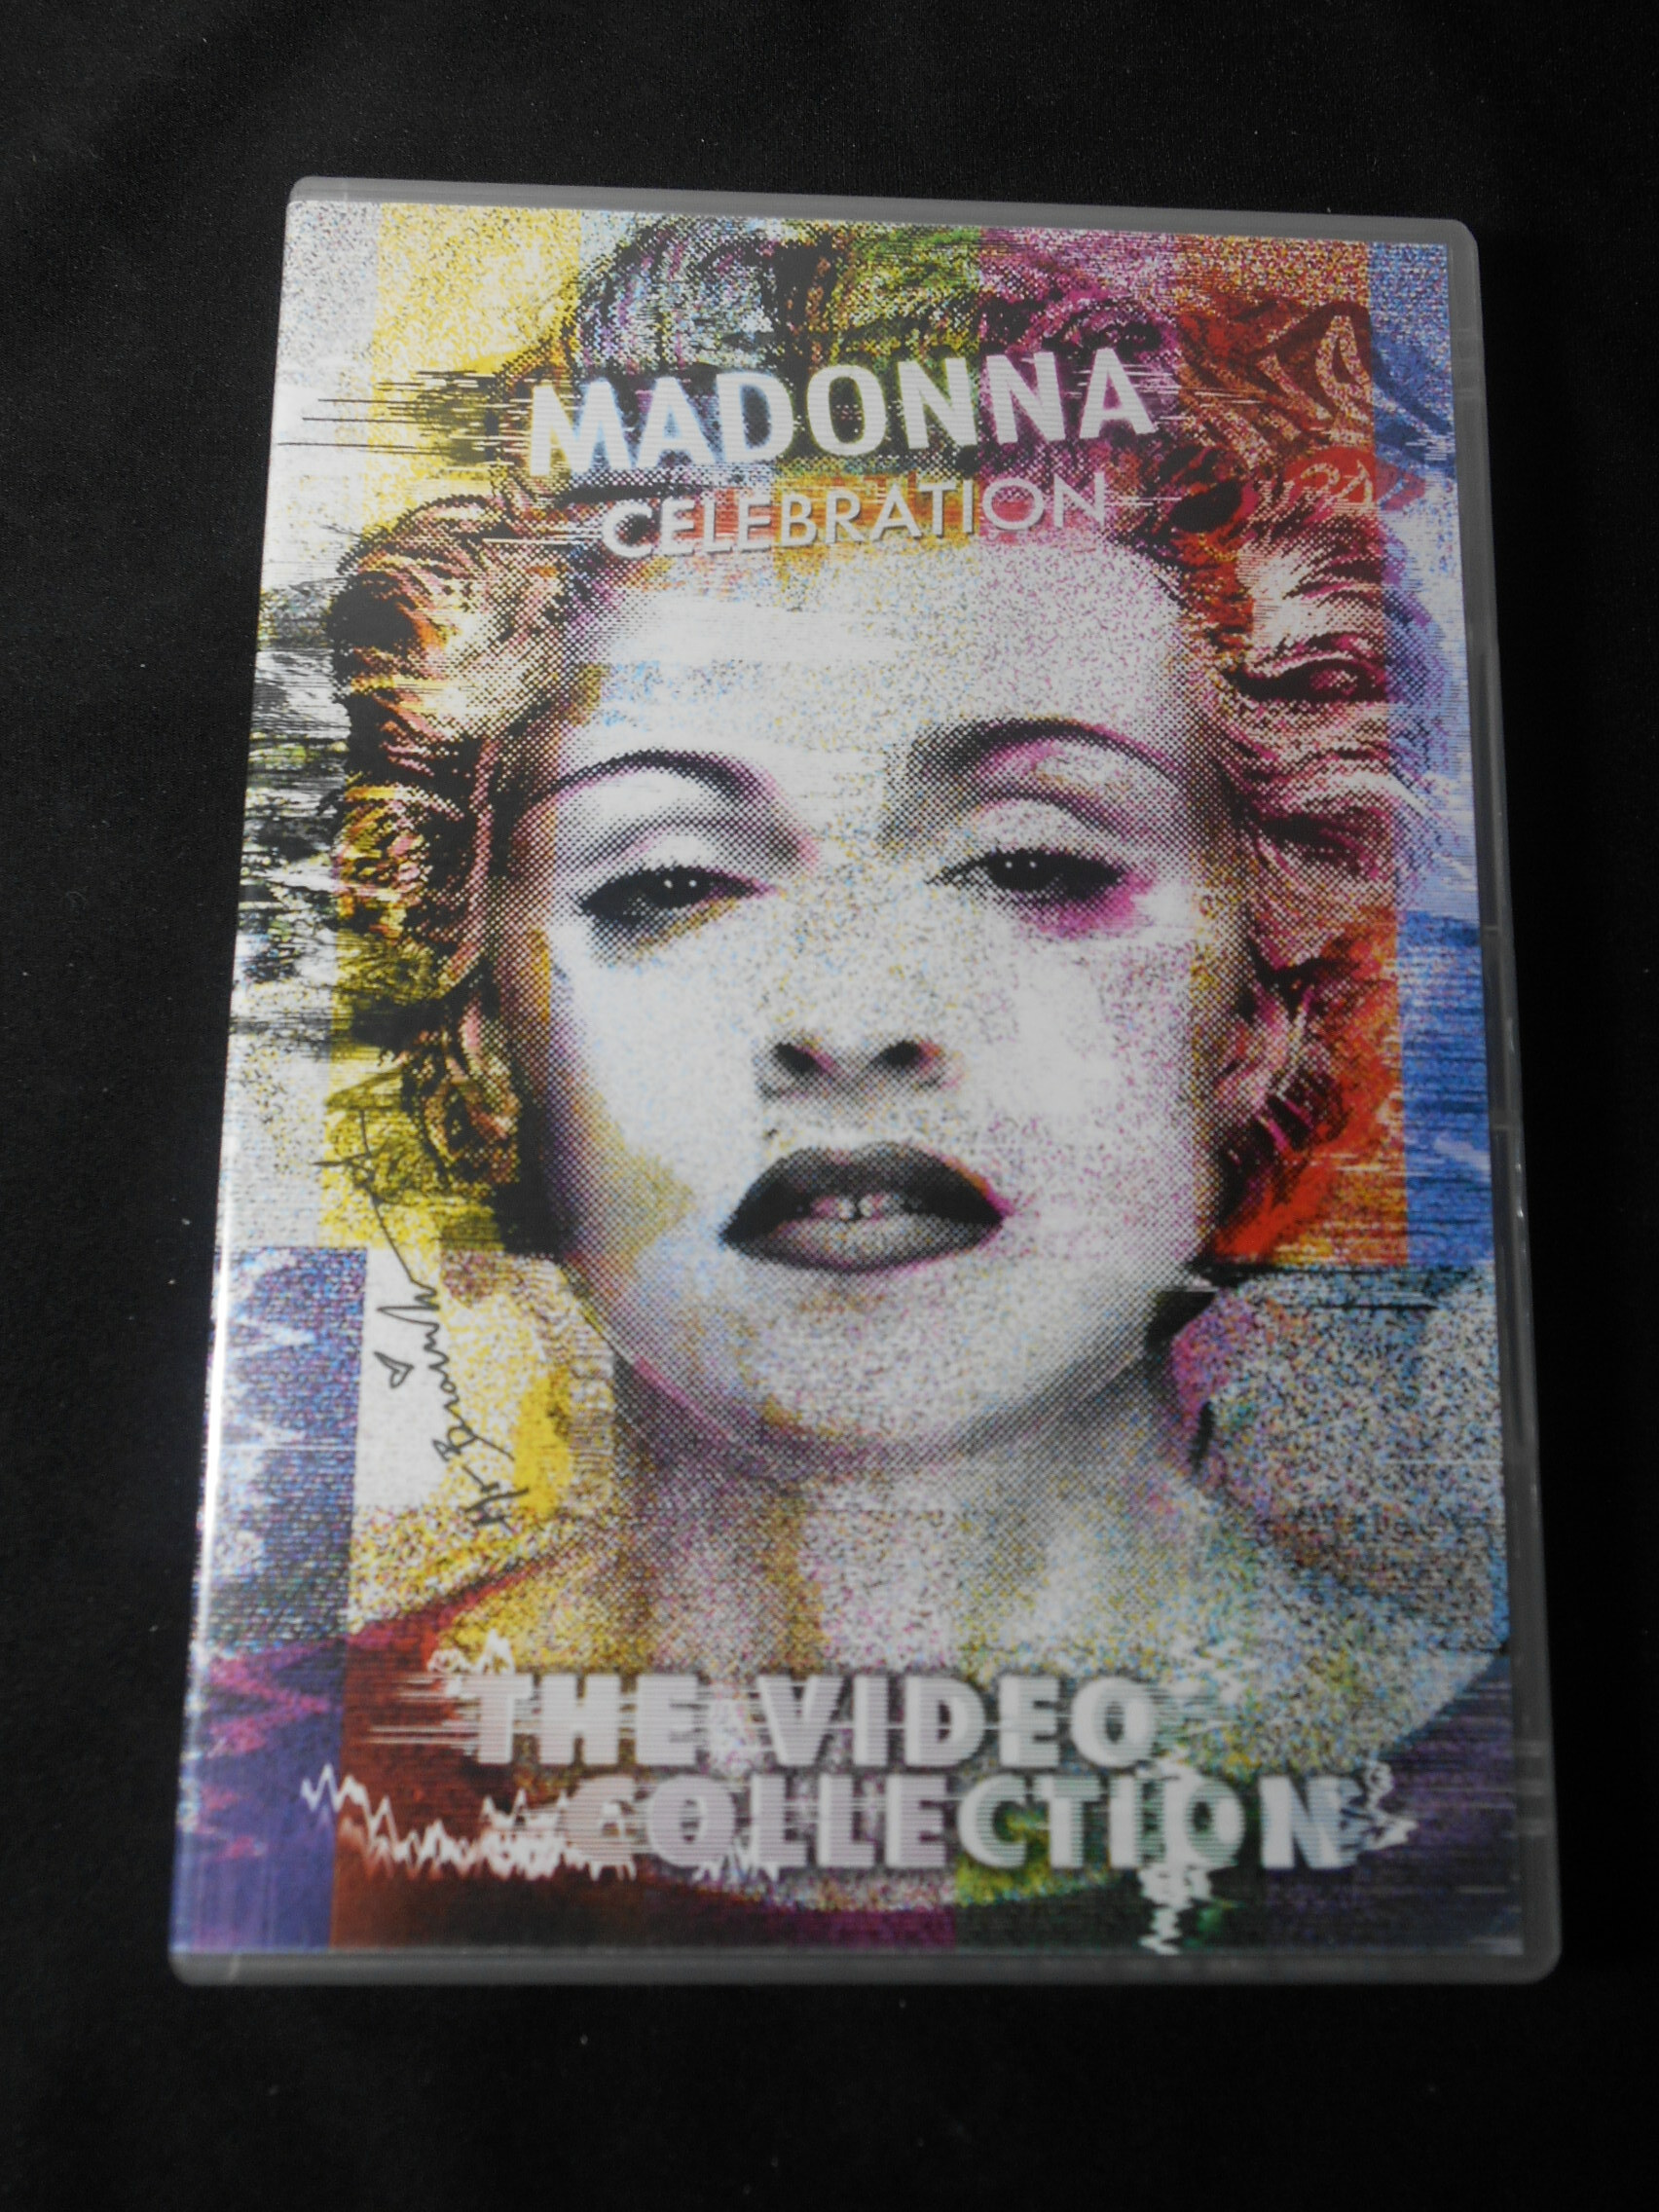 DVD - Madonna - Celebration The Video Collection (Duplo)